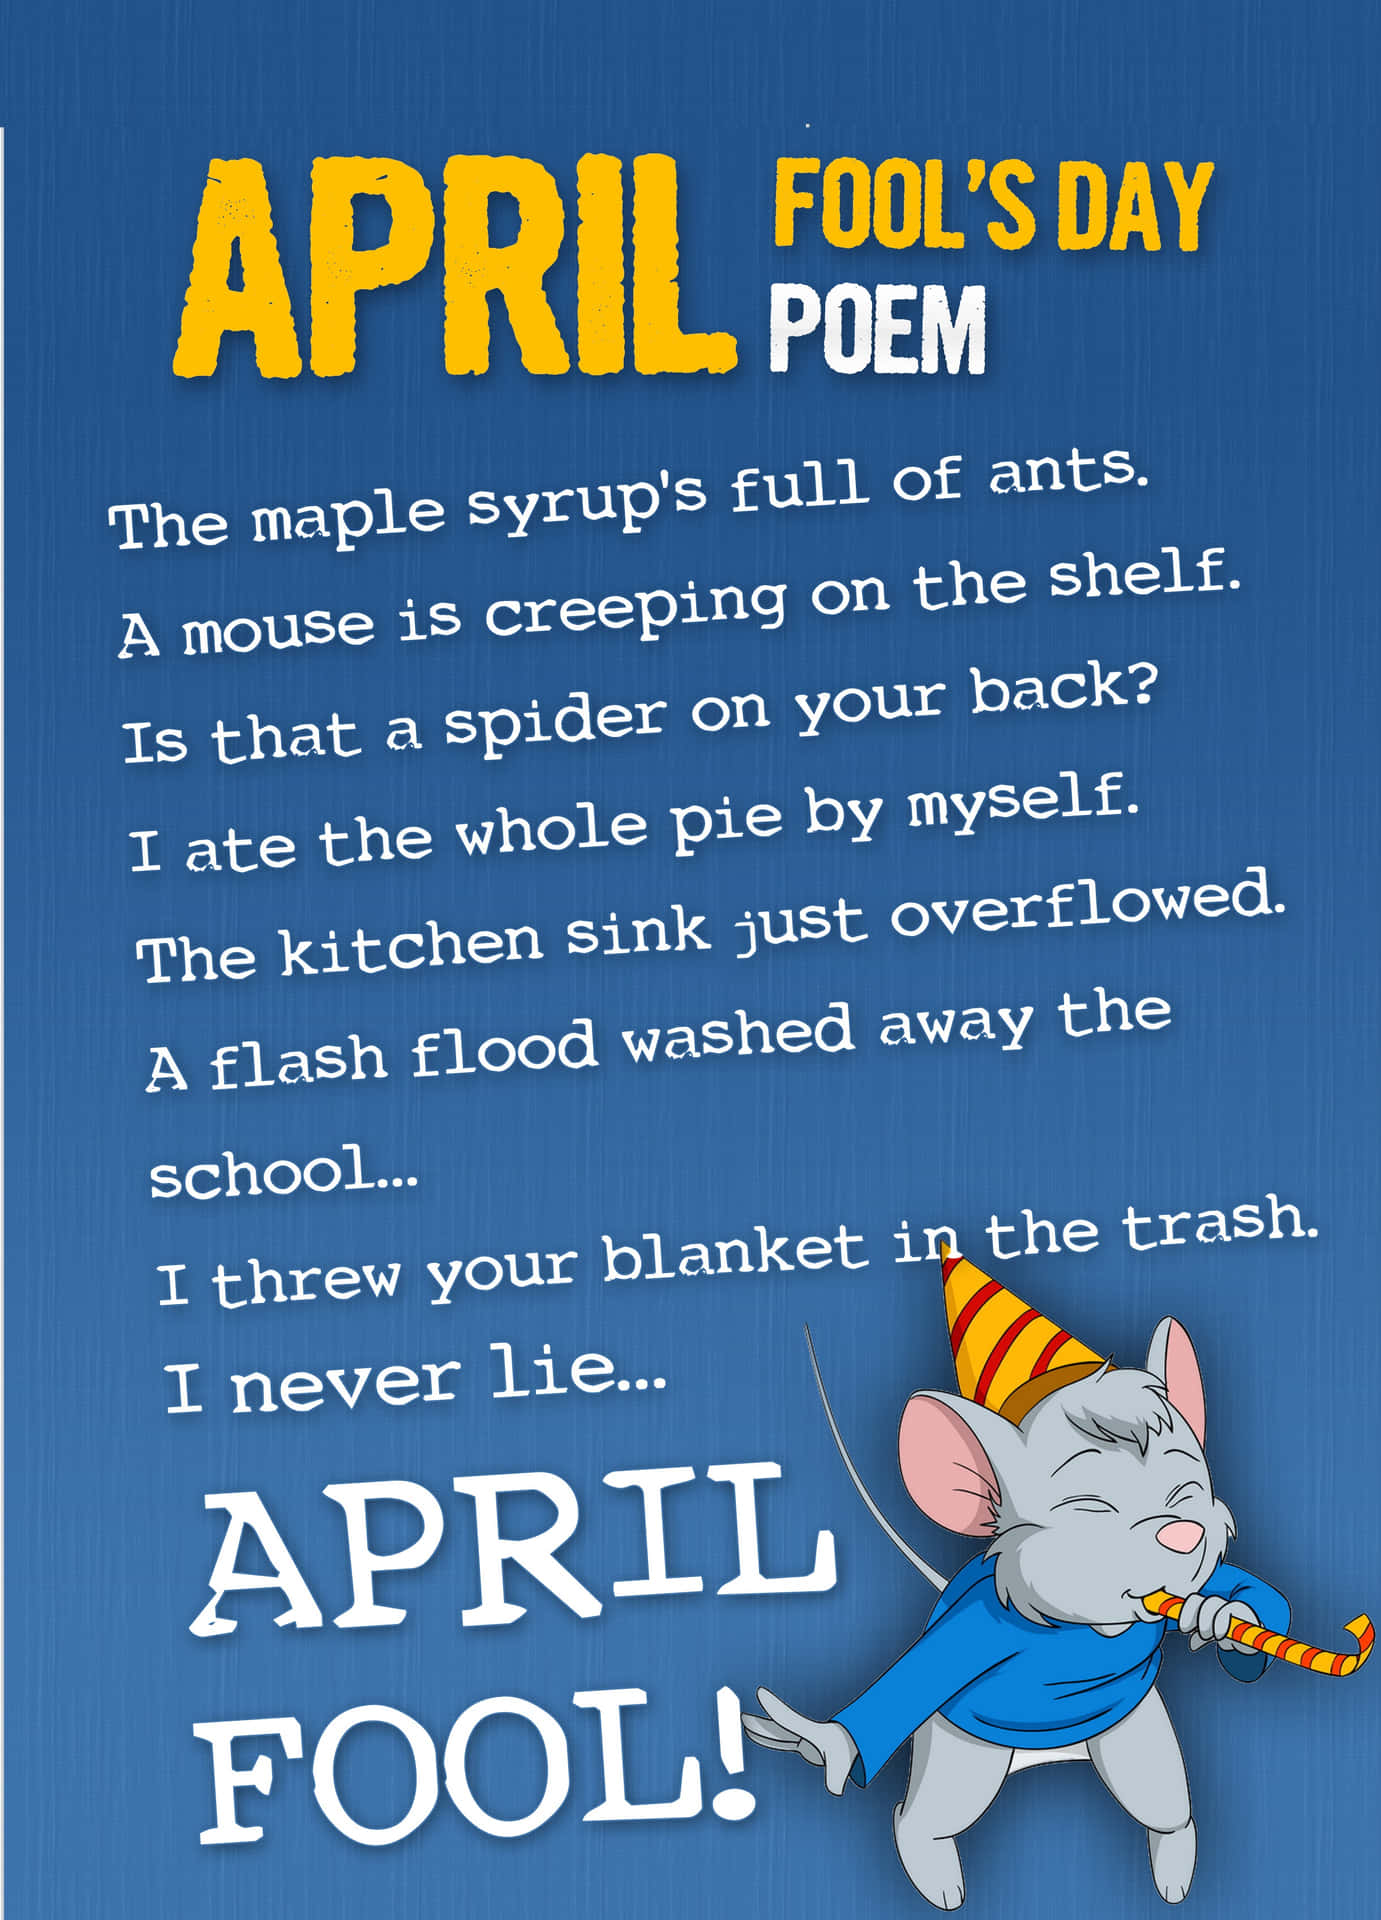 Start planning the perfect April Fools prank today!